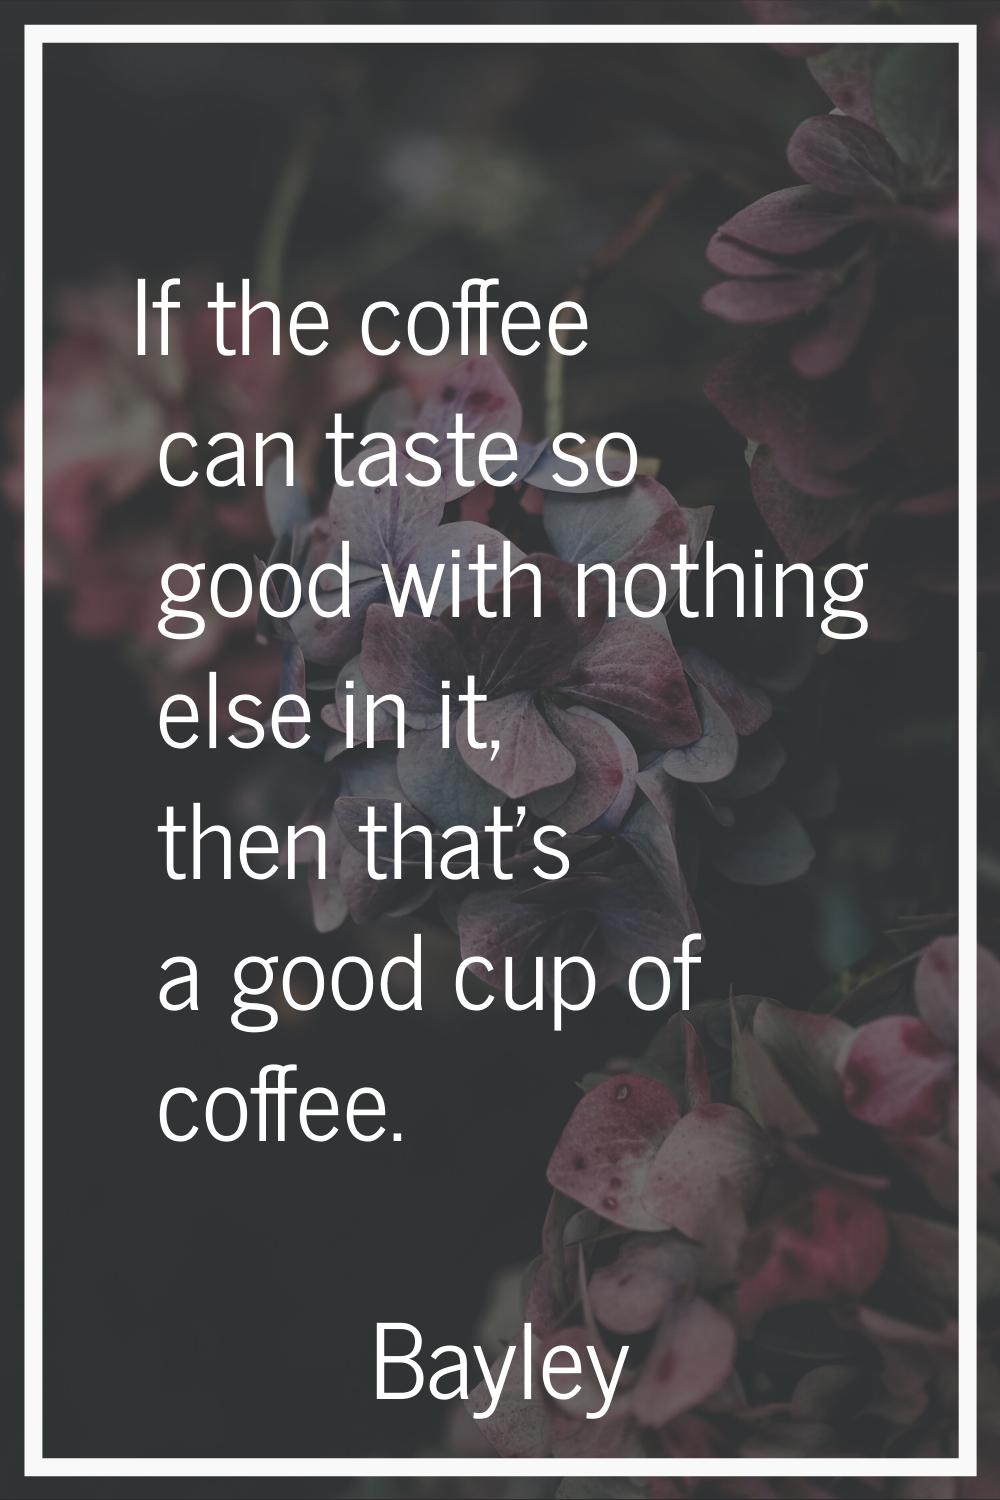 If the coffee can taste so good with nothing else in it, then that's a good cup of coffee.